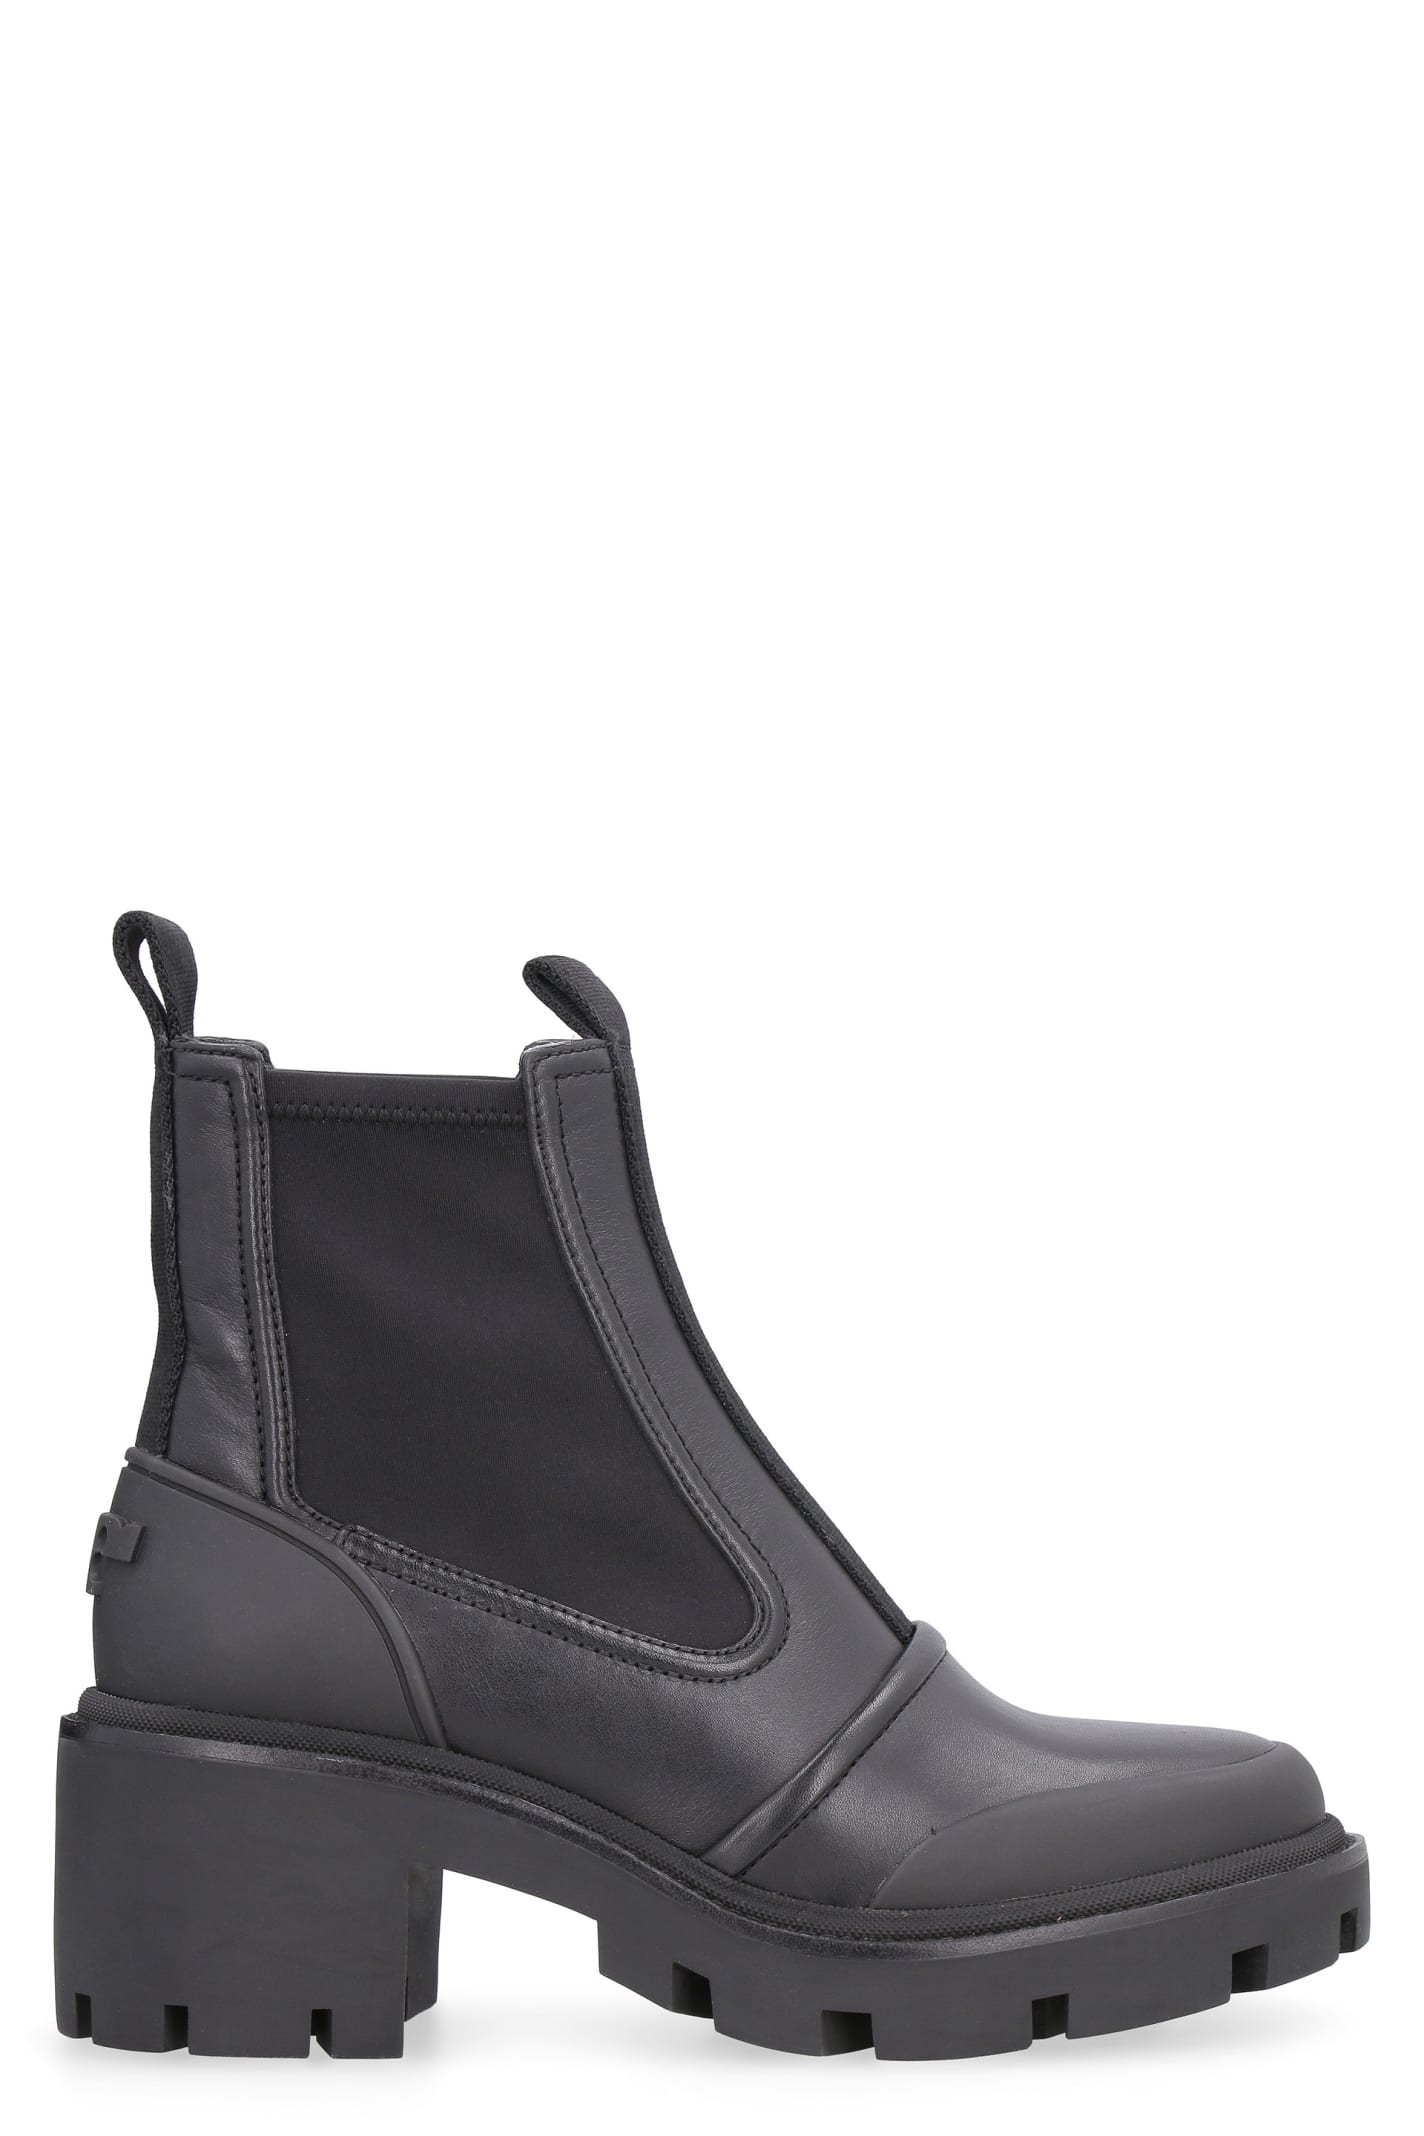 Tory Burch Leather Chelsea Boots